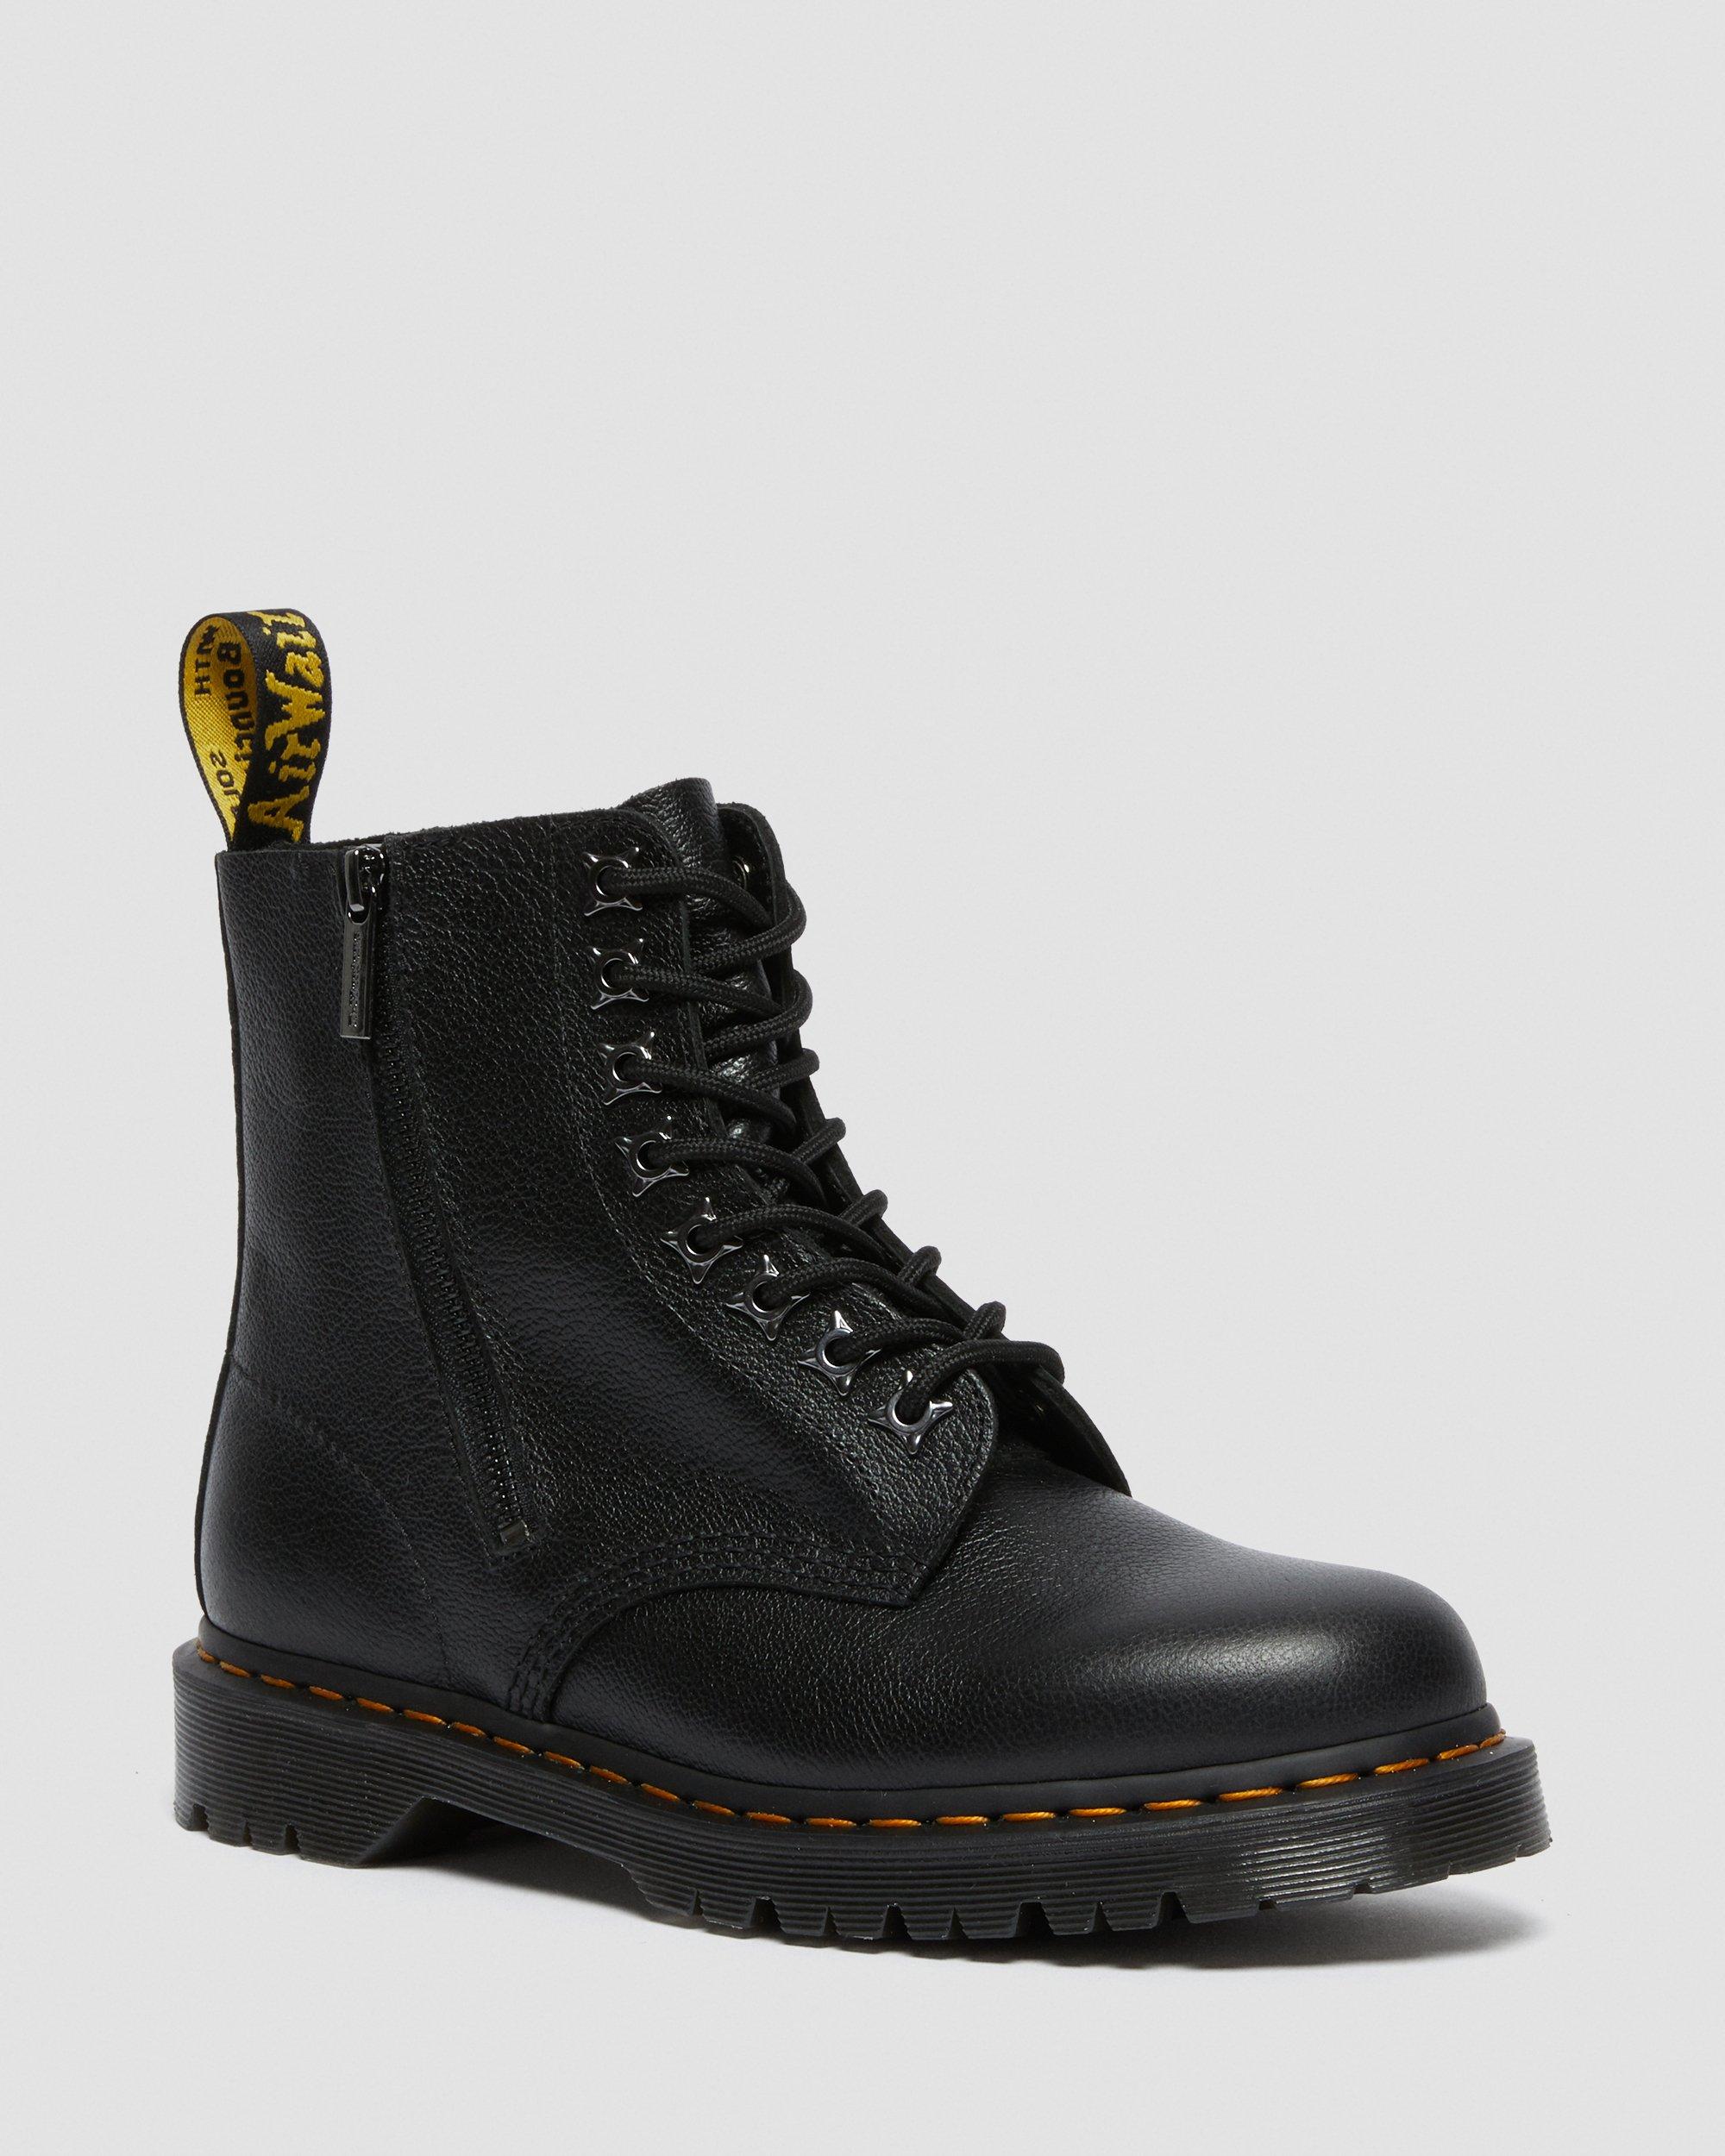 1460 PASCAL ZIP TUMBLED LEATHER LACE UP BOOTS | Dr. Martens Official